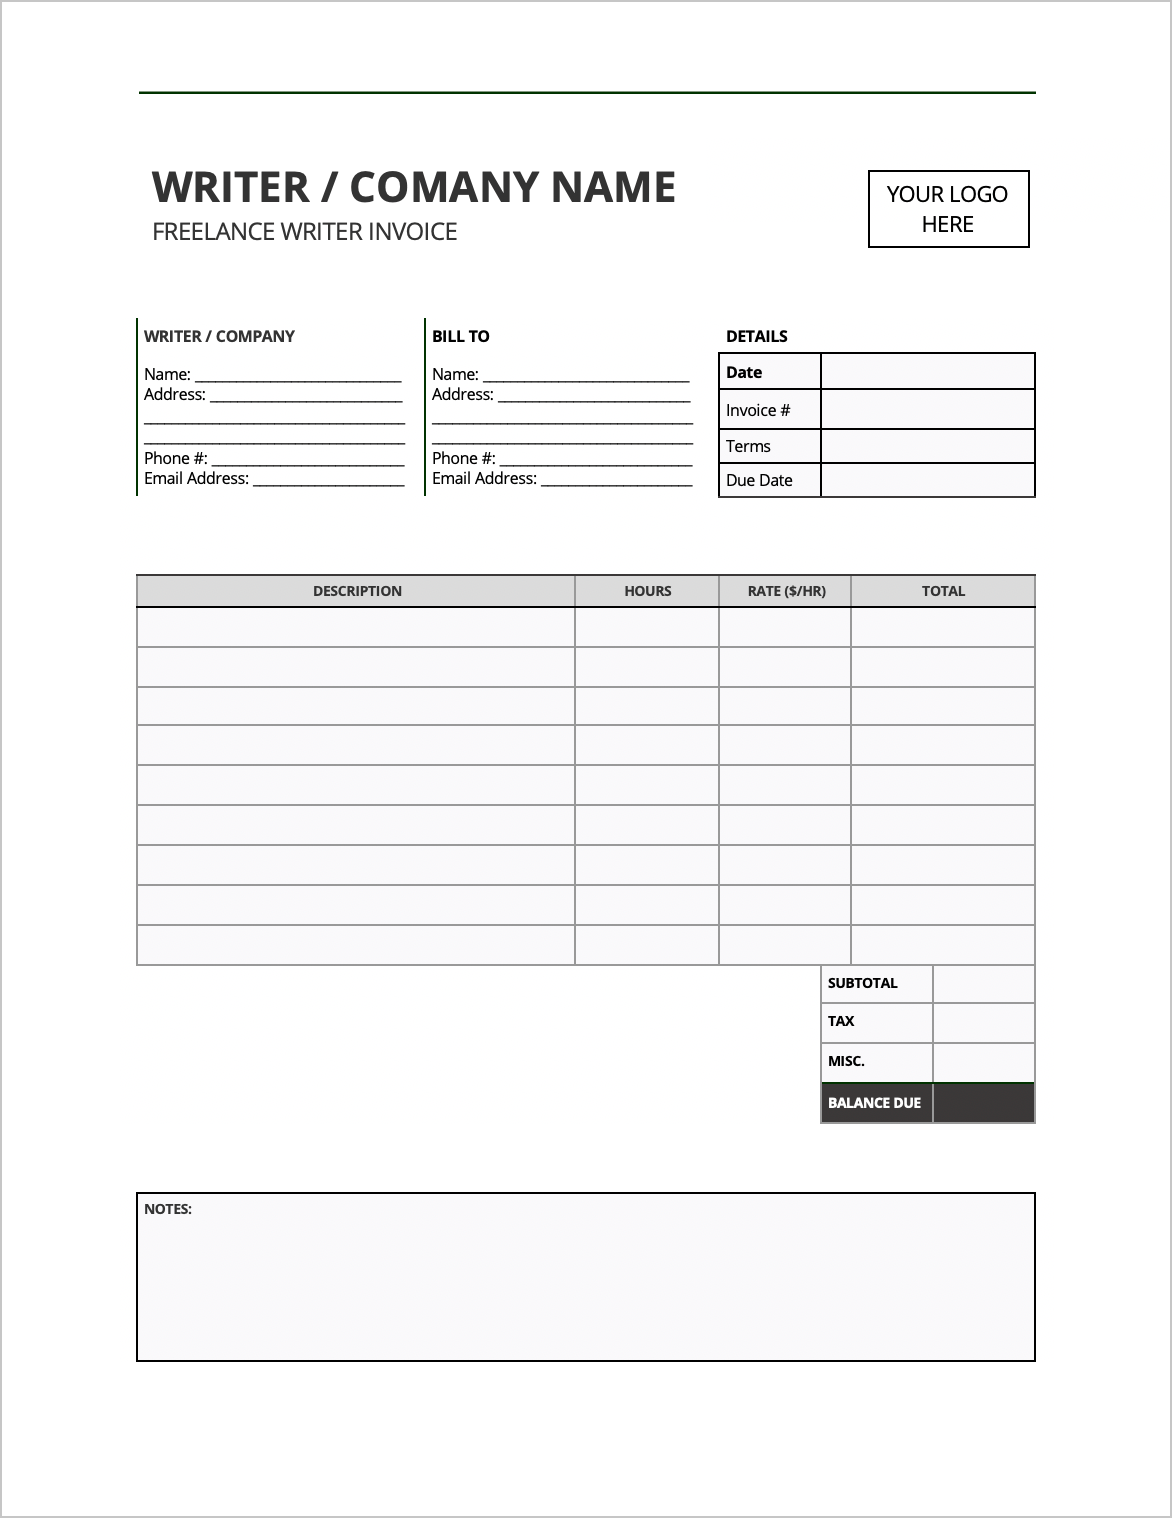 Free Freelance Writer Invoice Template PDF WORD EXCEL